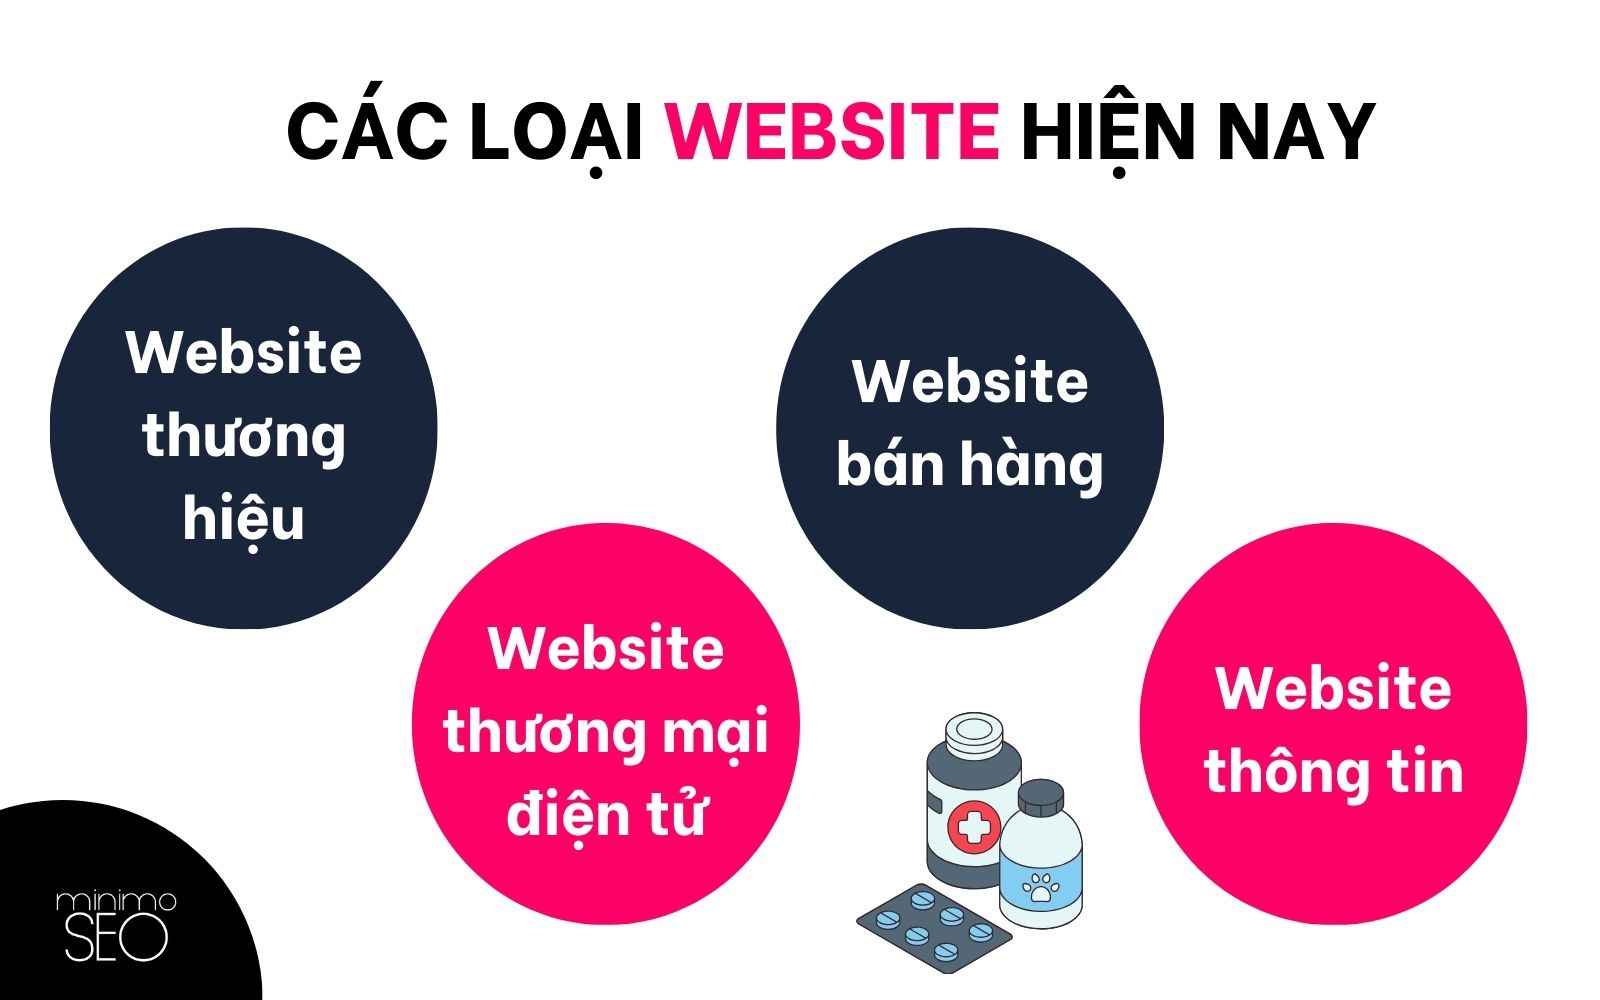 cac loai website hien nay